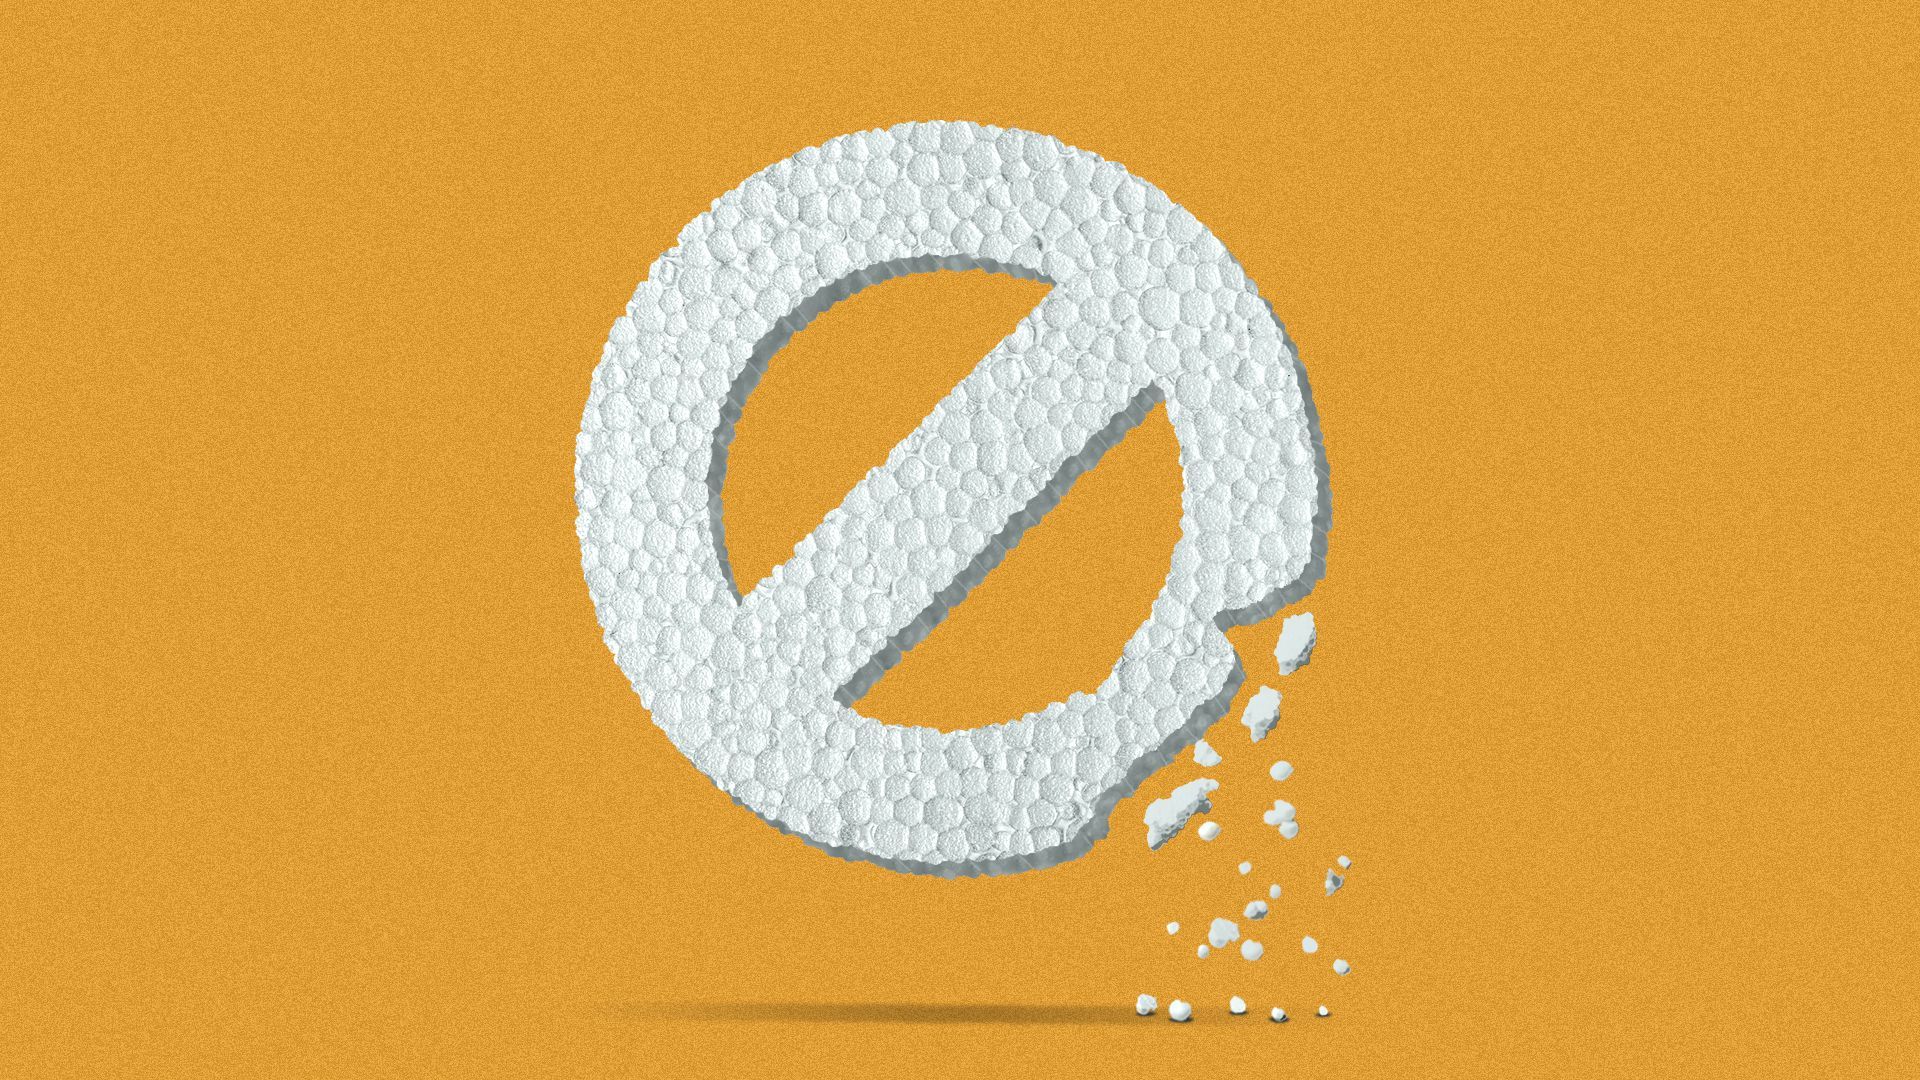 Illustration of a no symbol made out of styrofoam, which is crumbling.